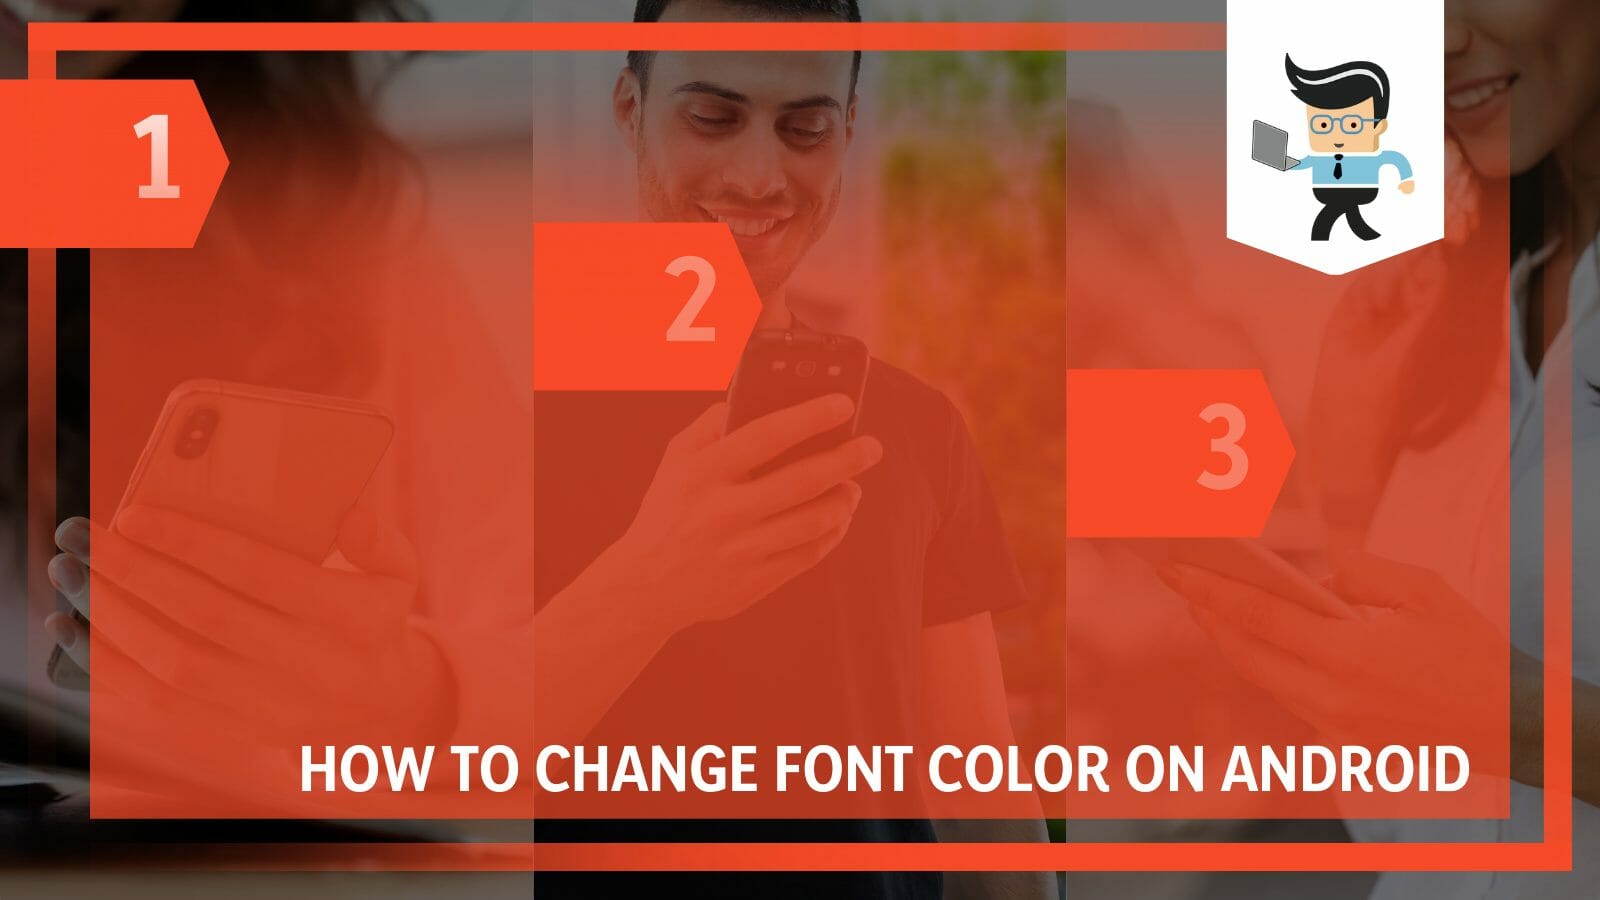 How to Change Font Color on Android